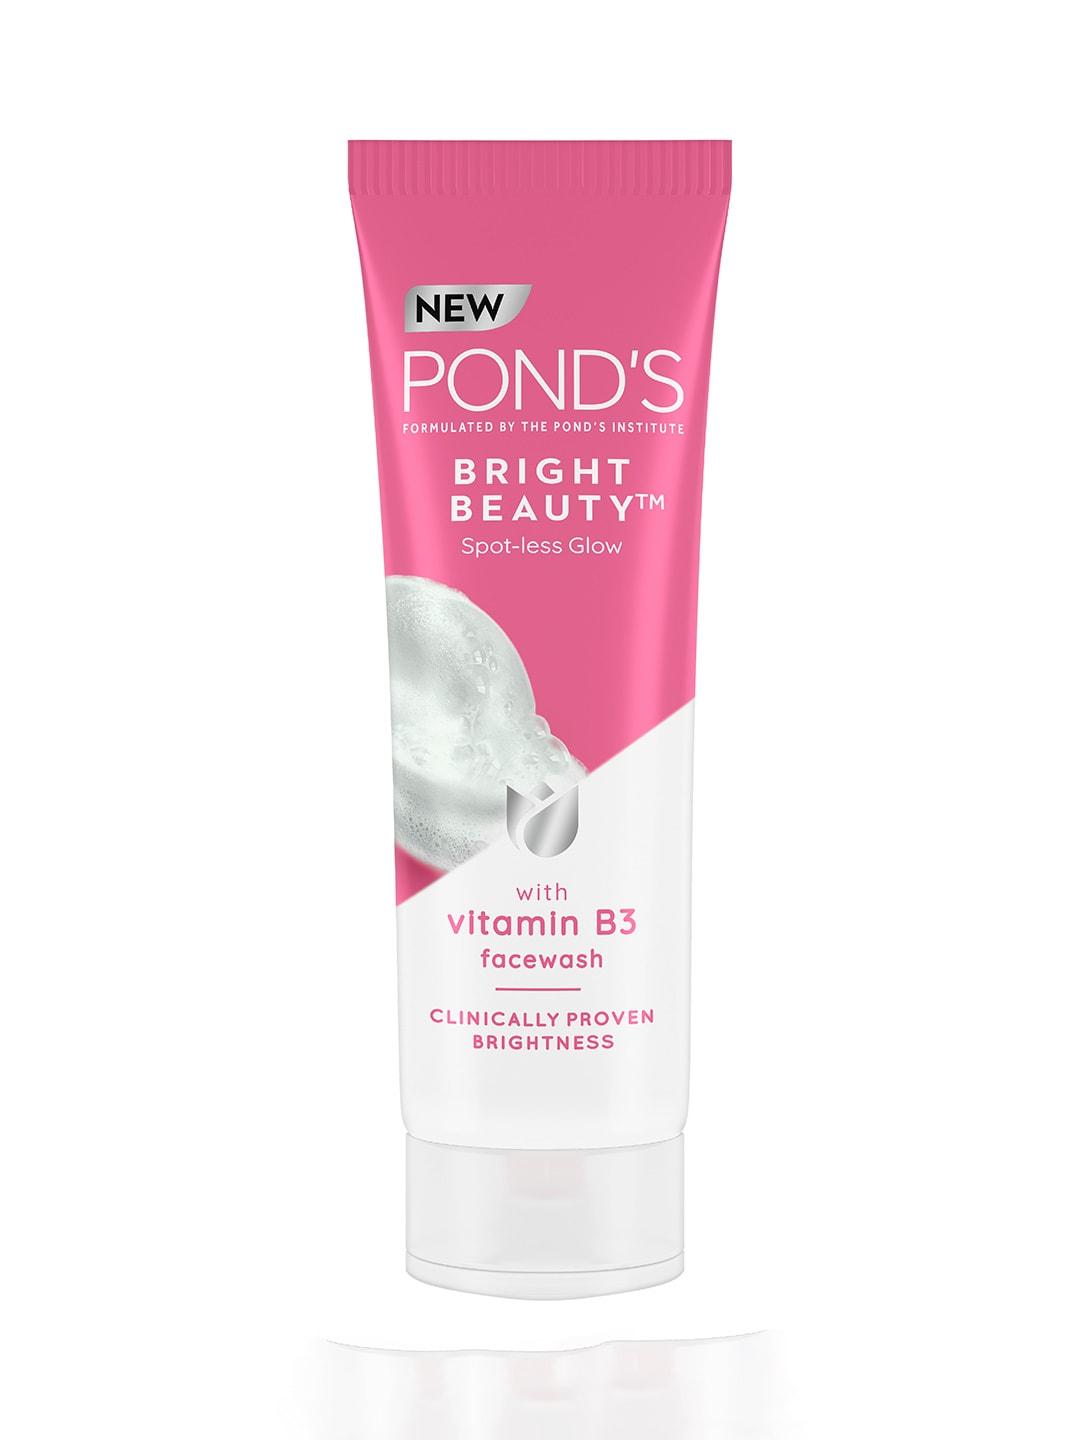 Ponds Bright Beauty Spot-Less Glow Face Wash with Vitamin B3 - 50g